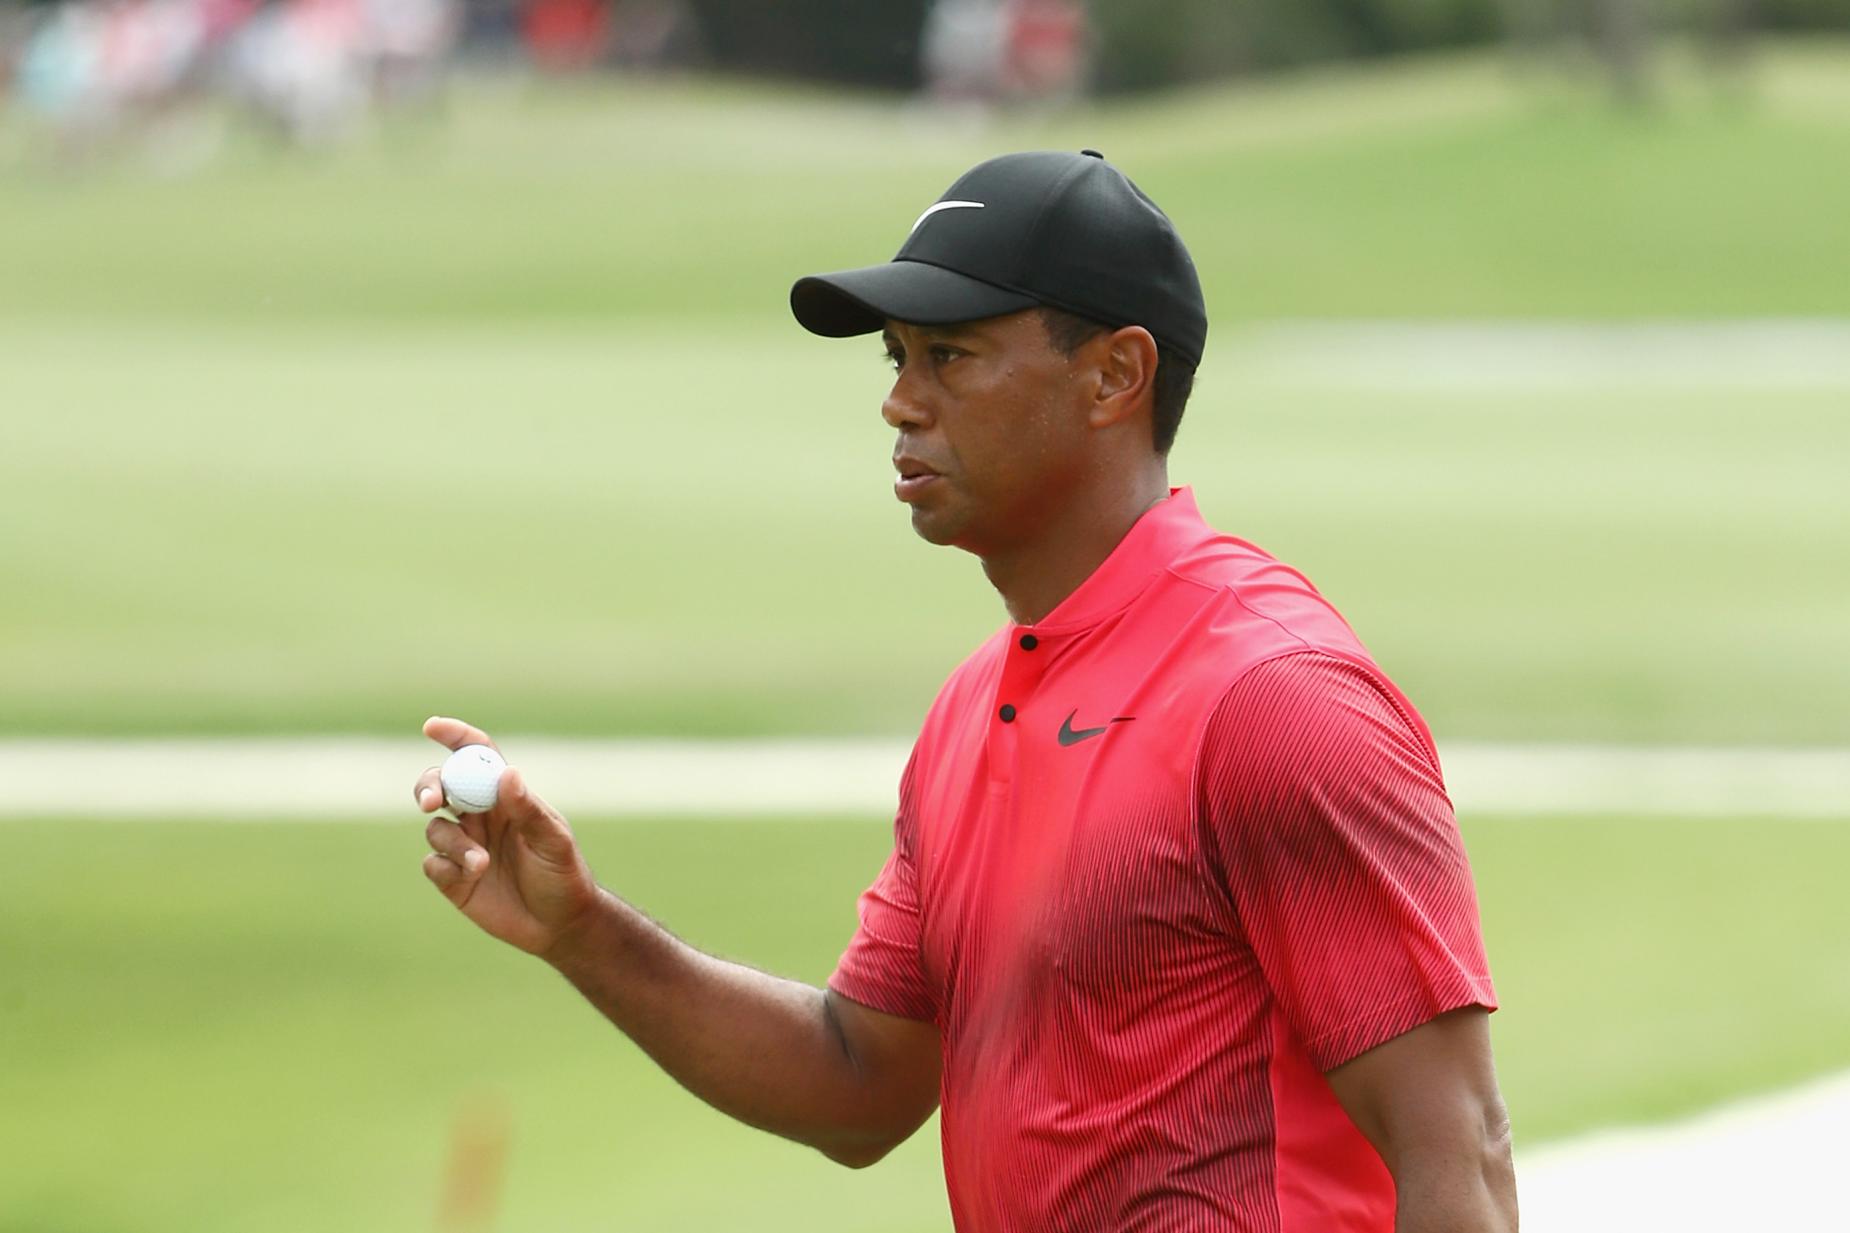 Players Championship 2018 Tiger Woods shows he's closer to winning